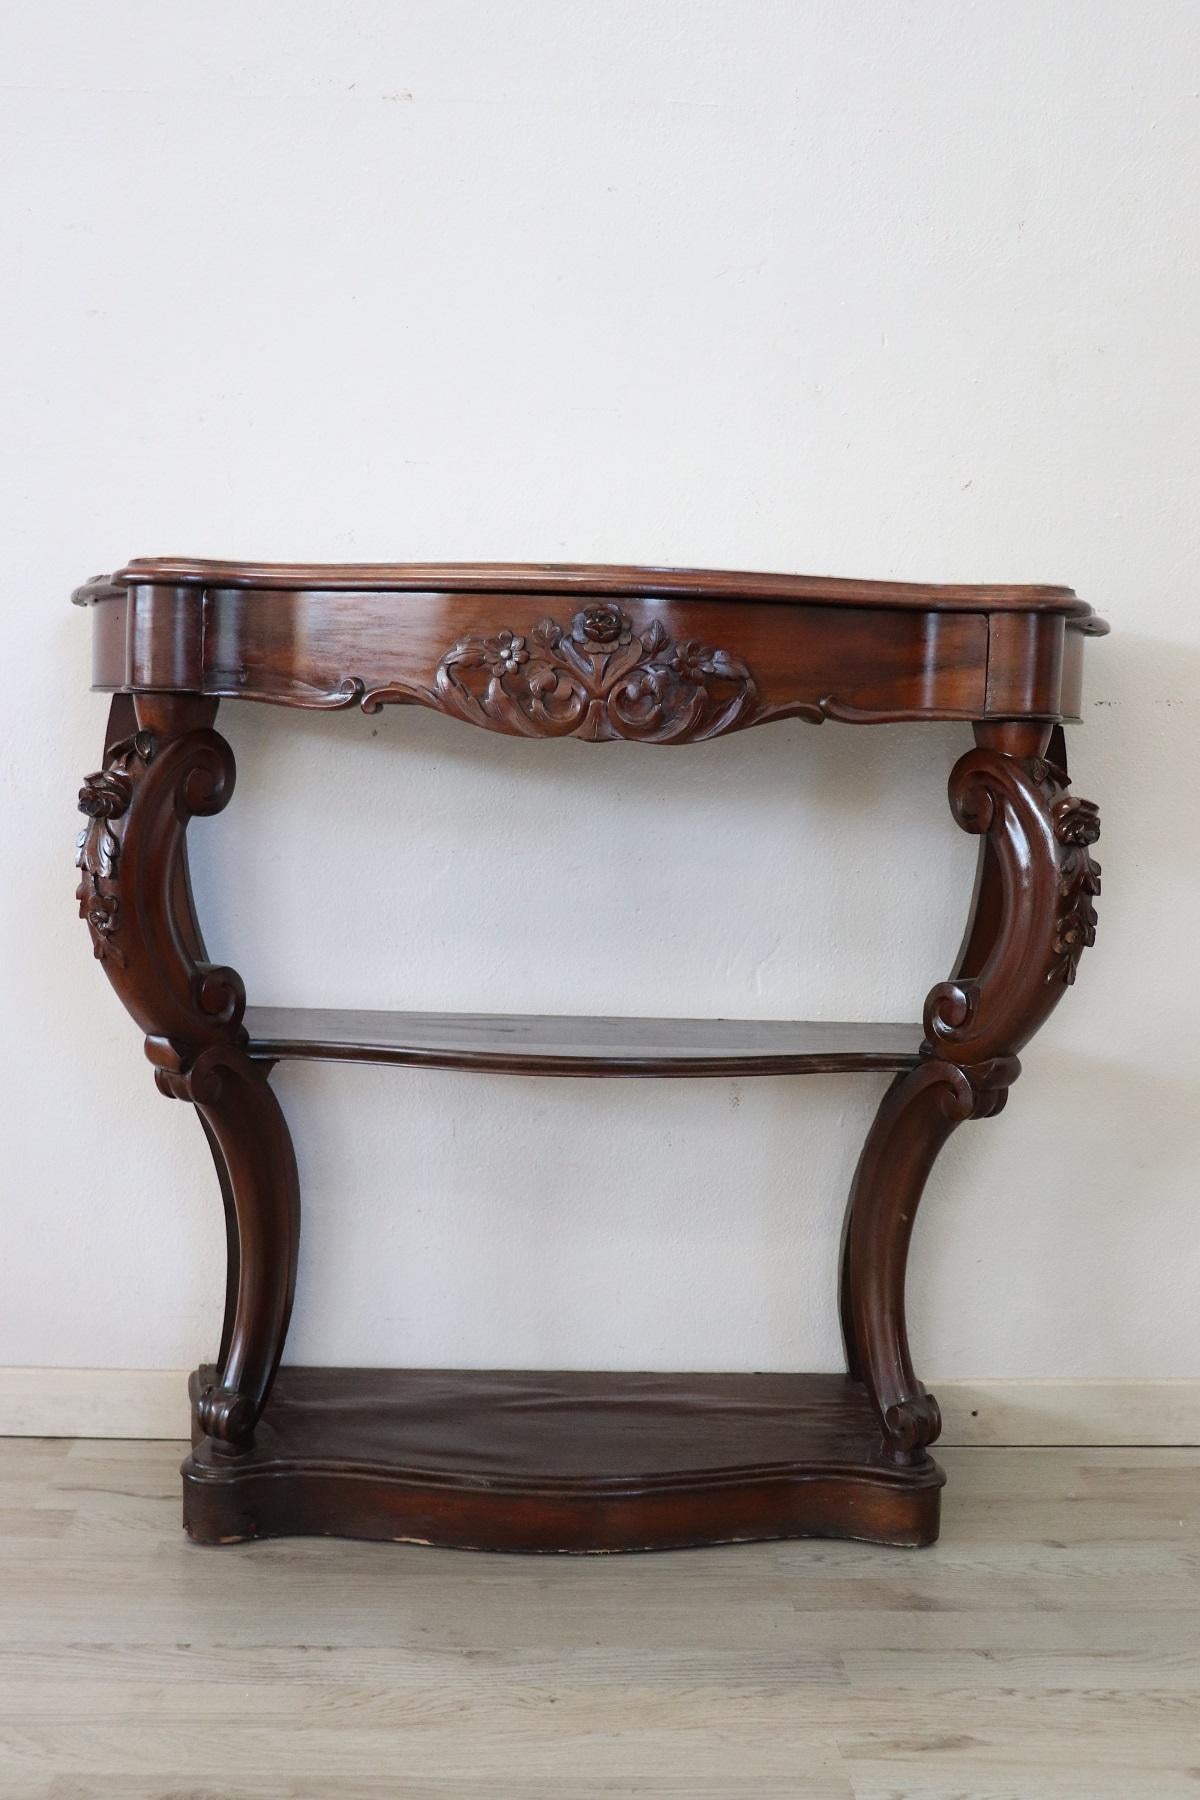 Antique console table of rare small size mid-19th century in full Louis Philippe era. The console is made of solid carved walnut with floral decorations, on the front a comfortable drawer. Rare due to its small size, perfect to be placed even in